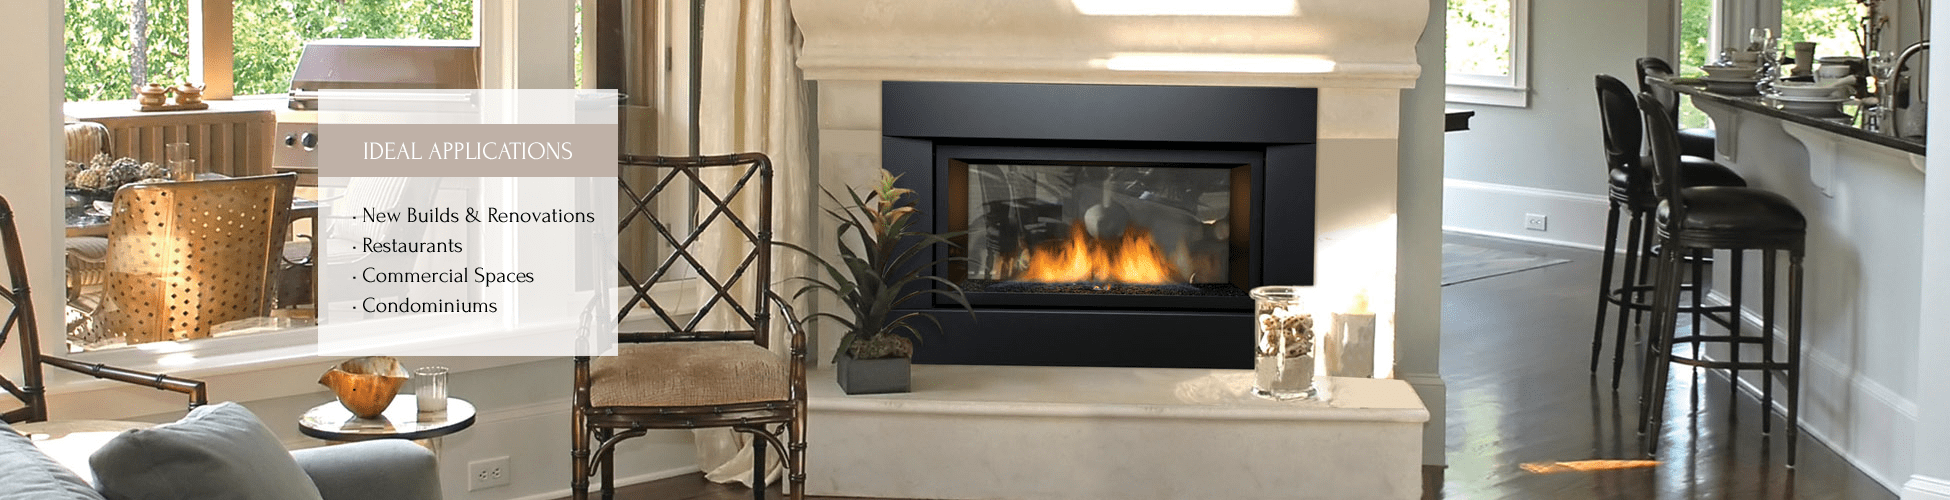 Sierra Flame Gas Fireplace Palisade 36 Gas Fireplace - NG by Sierra Flame